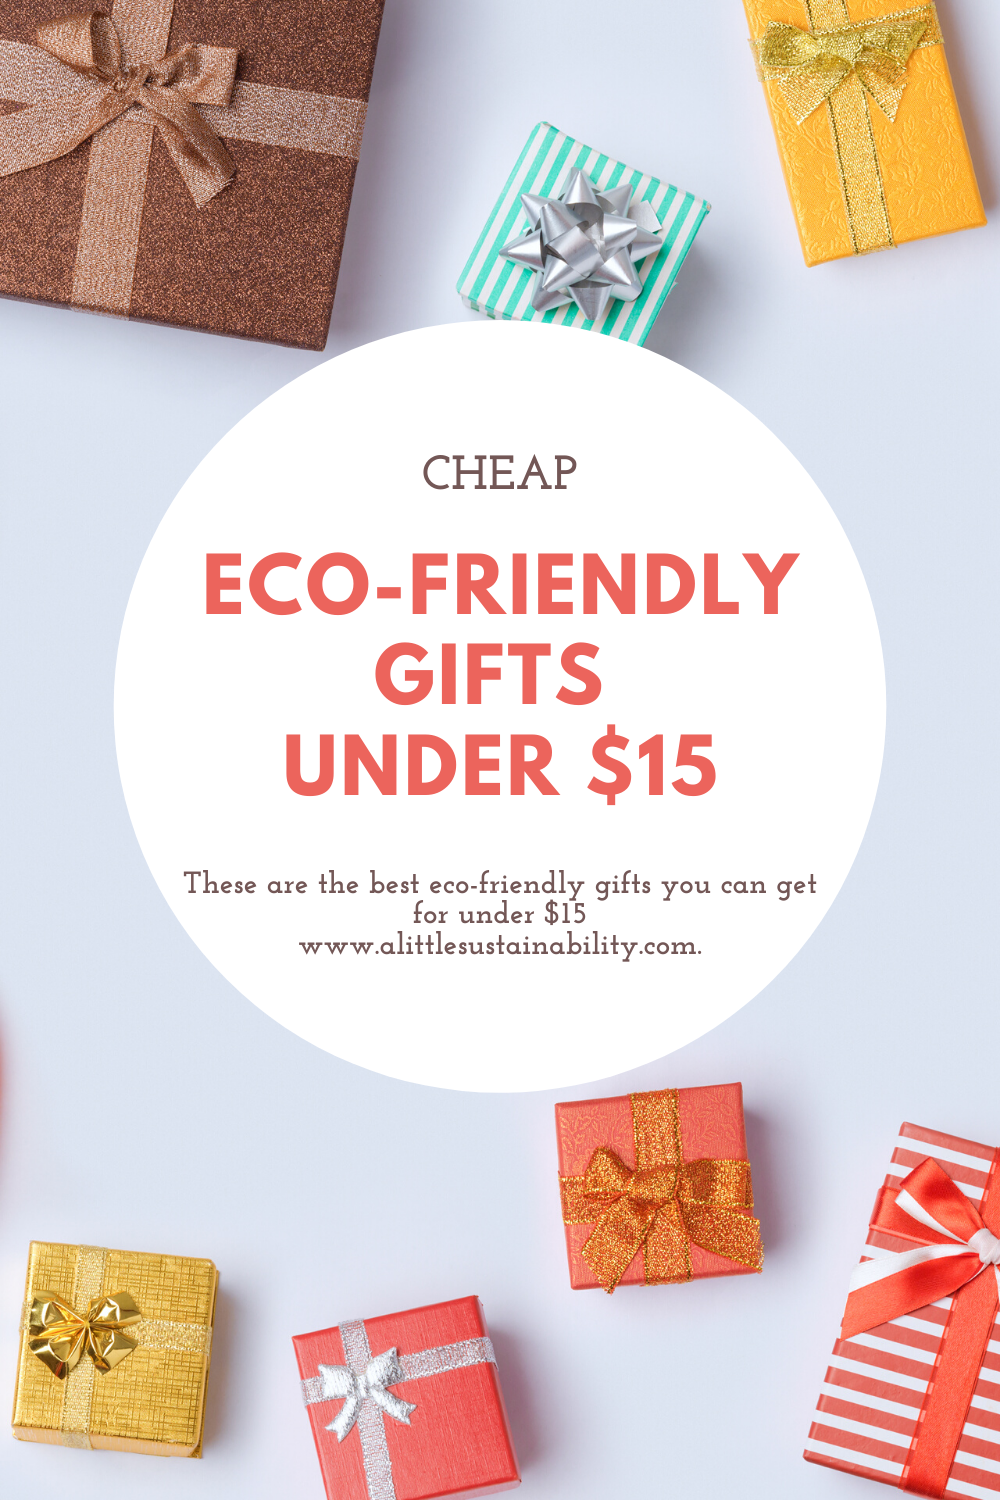 Don’t stress out over buying eco-friendly gifts. In our post you’ll find 10 cheap eco-friendly gifts all under $15 that the green living enthusiasts on your list will love. On our list we have great low waste swaps for the eco conscious people that you love.